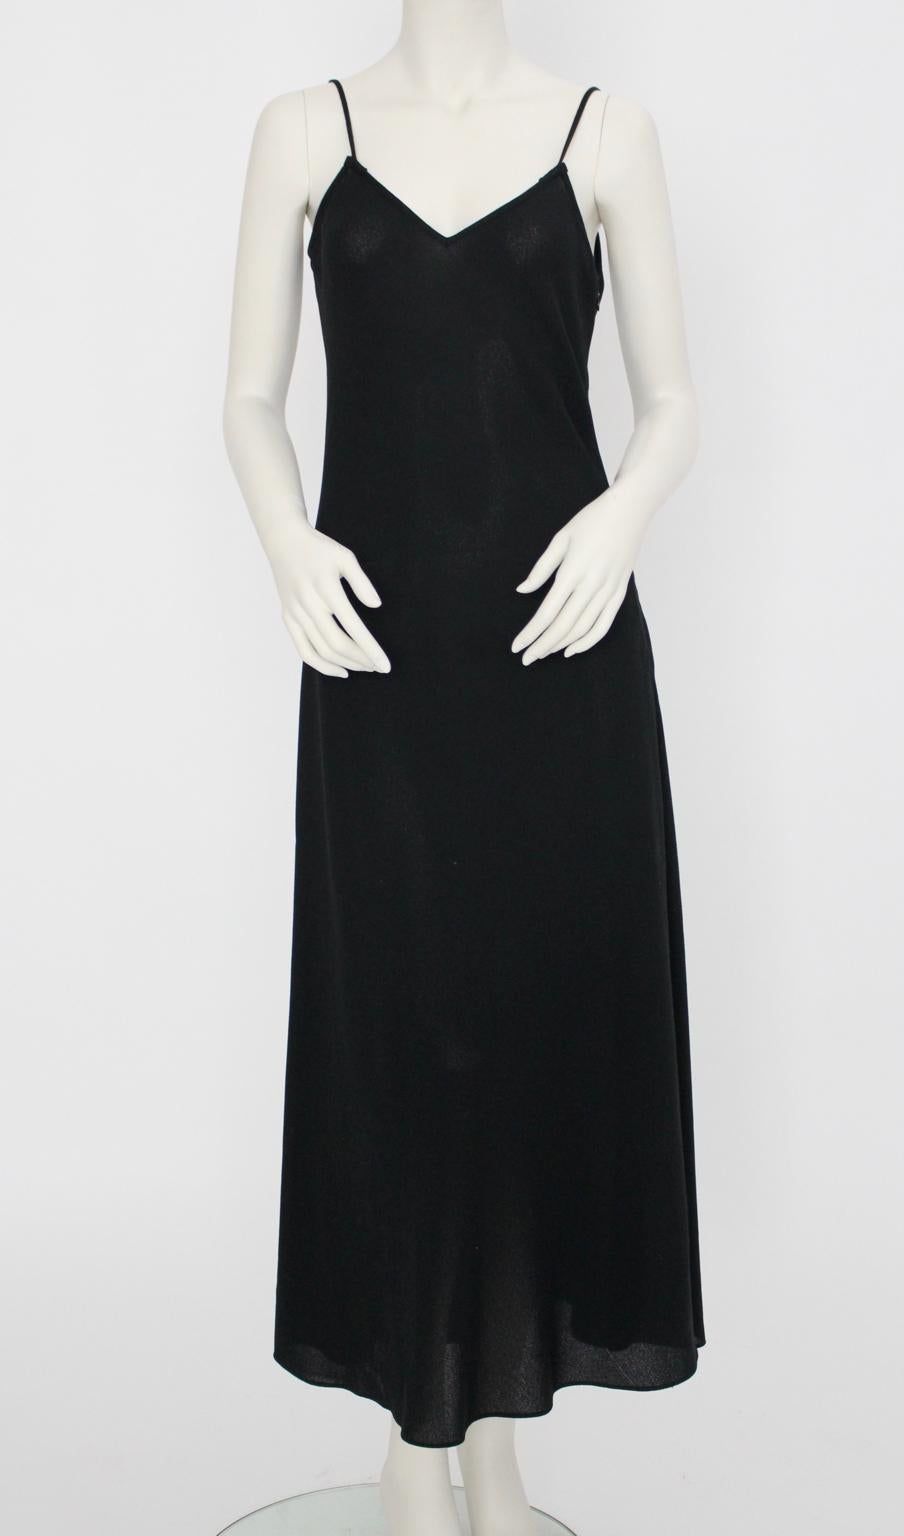 Black Spaghetti Strap Slip Dress made of textil, probably viscose mixed with acryl, with one zip closure on the side.
The dress has no lining, it is a little bit sheer, but you are able to wear it without underwear. 
Great dress to wear it casual or